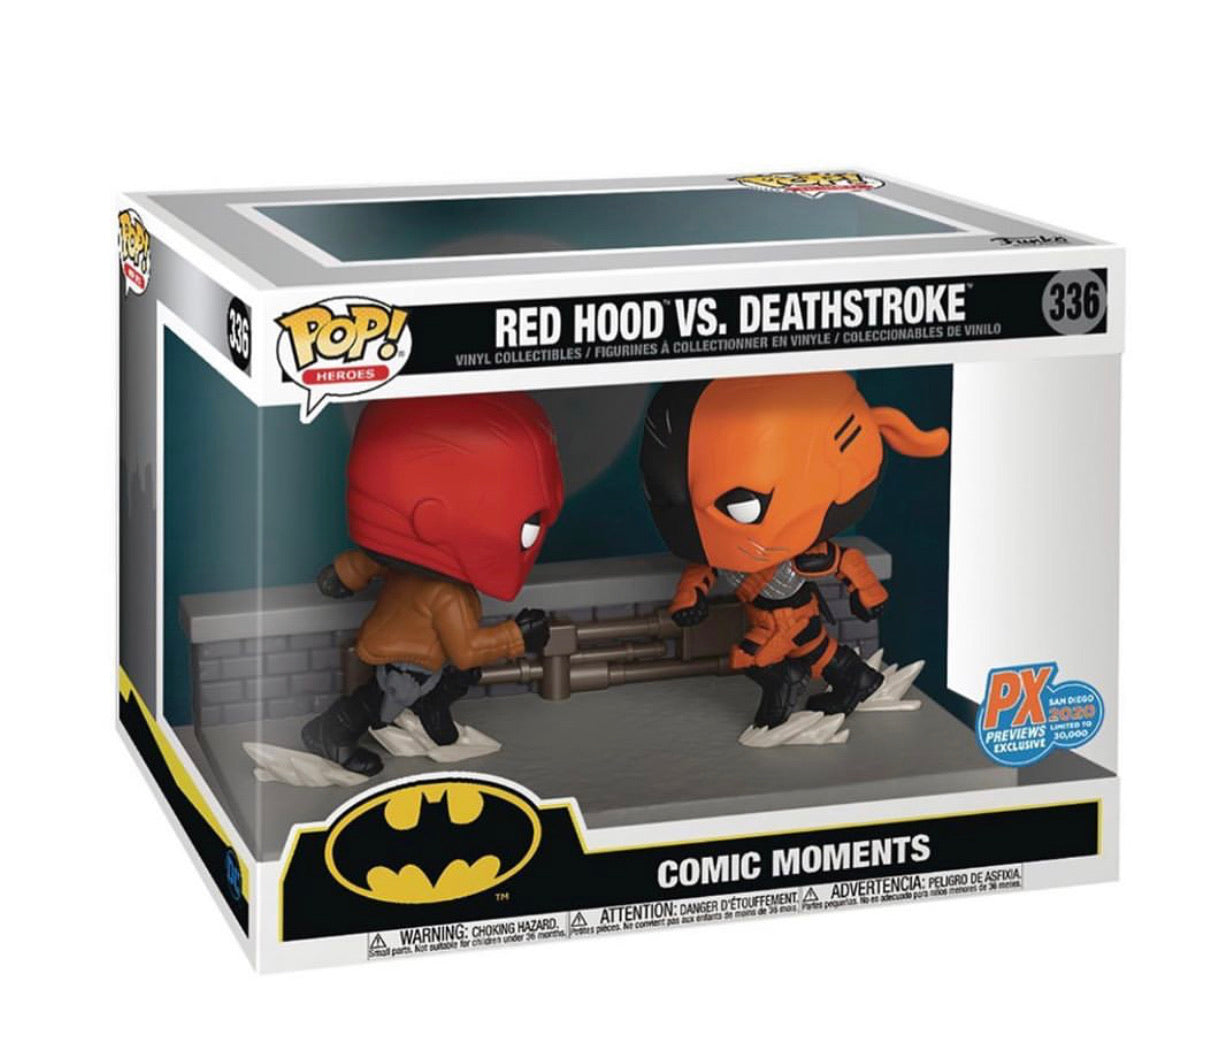 Pop! Dc: Comic Moments - Red Hood Vs. Deathstroke (sdcc 2020 Exclusive)